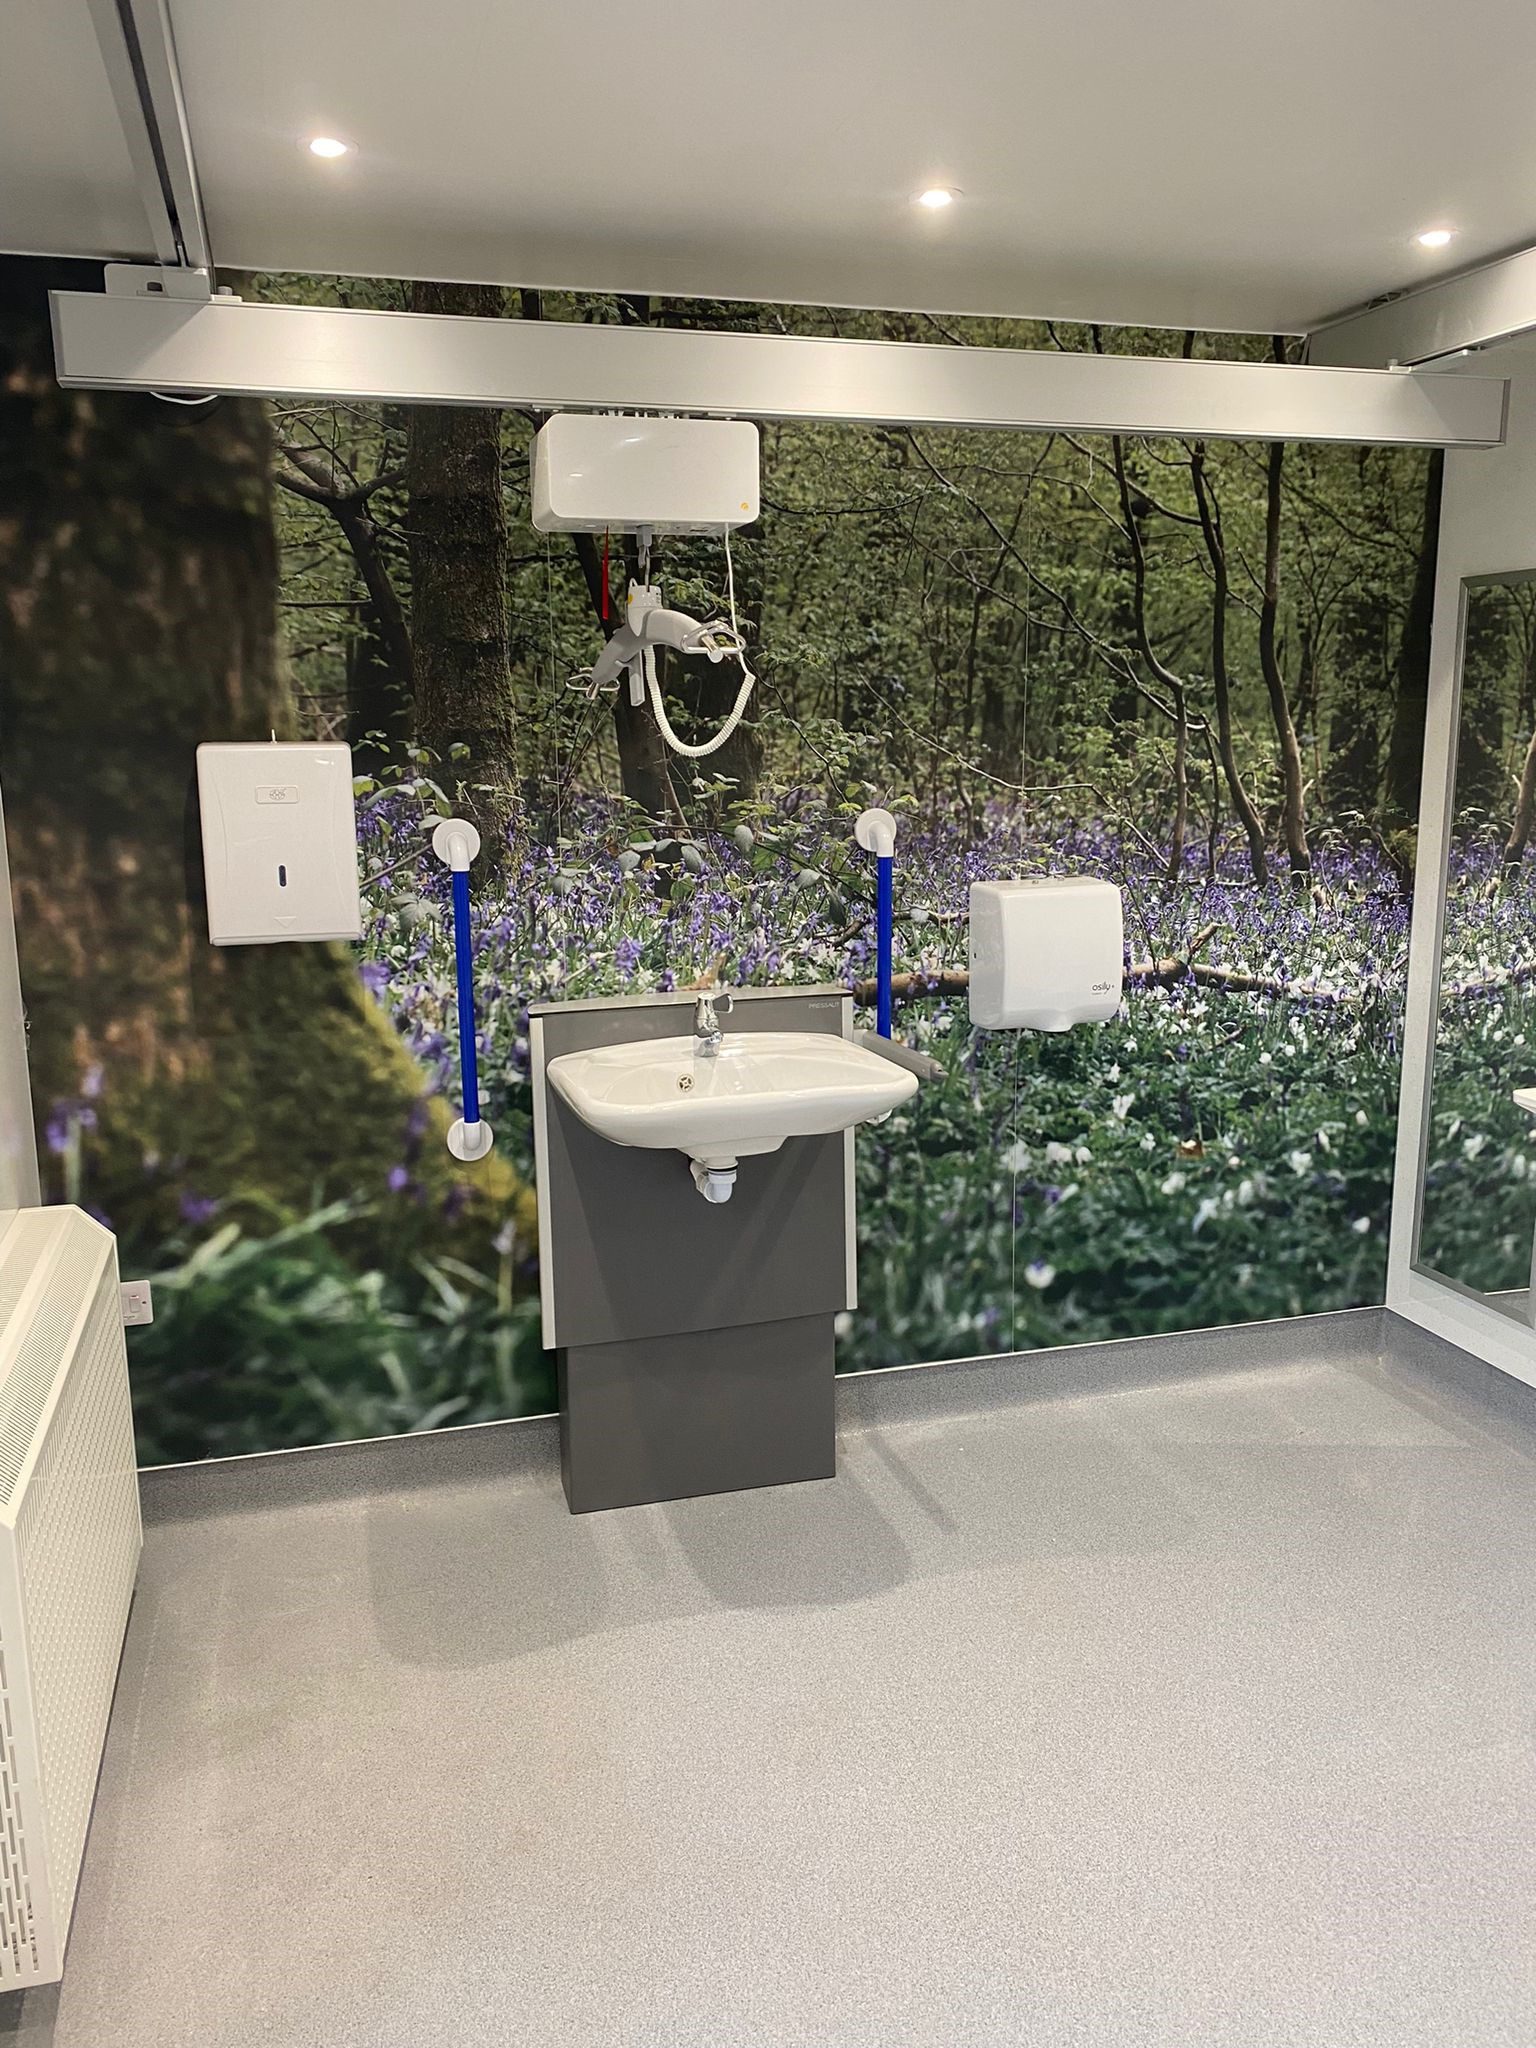 Sink against wall with bluebell woodland scene in accessible toilet.